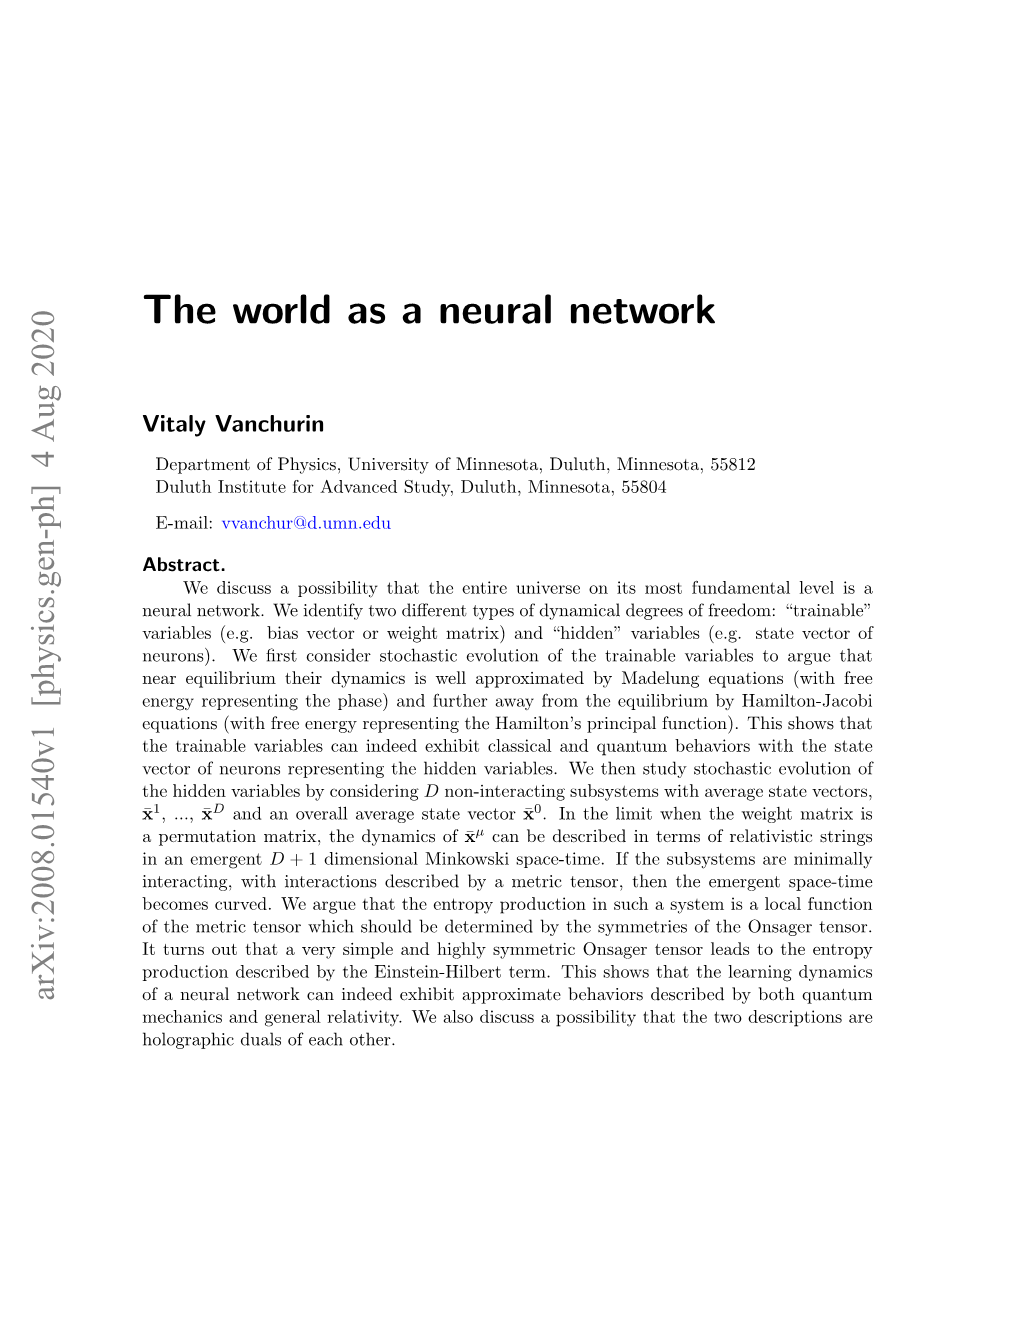 The World As a Neural Network